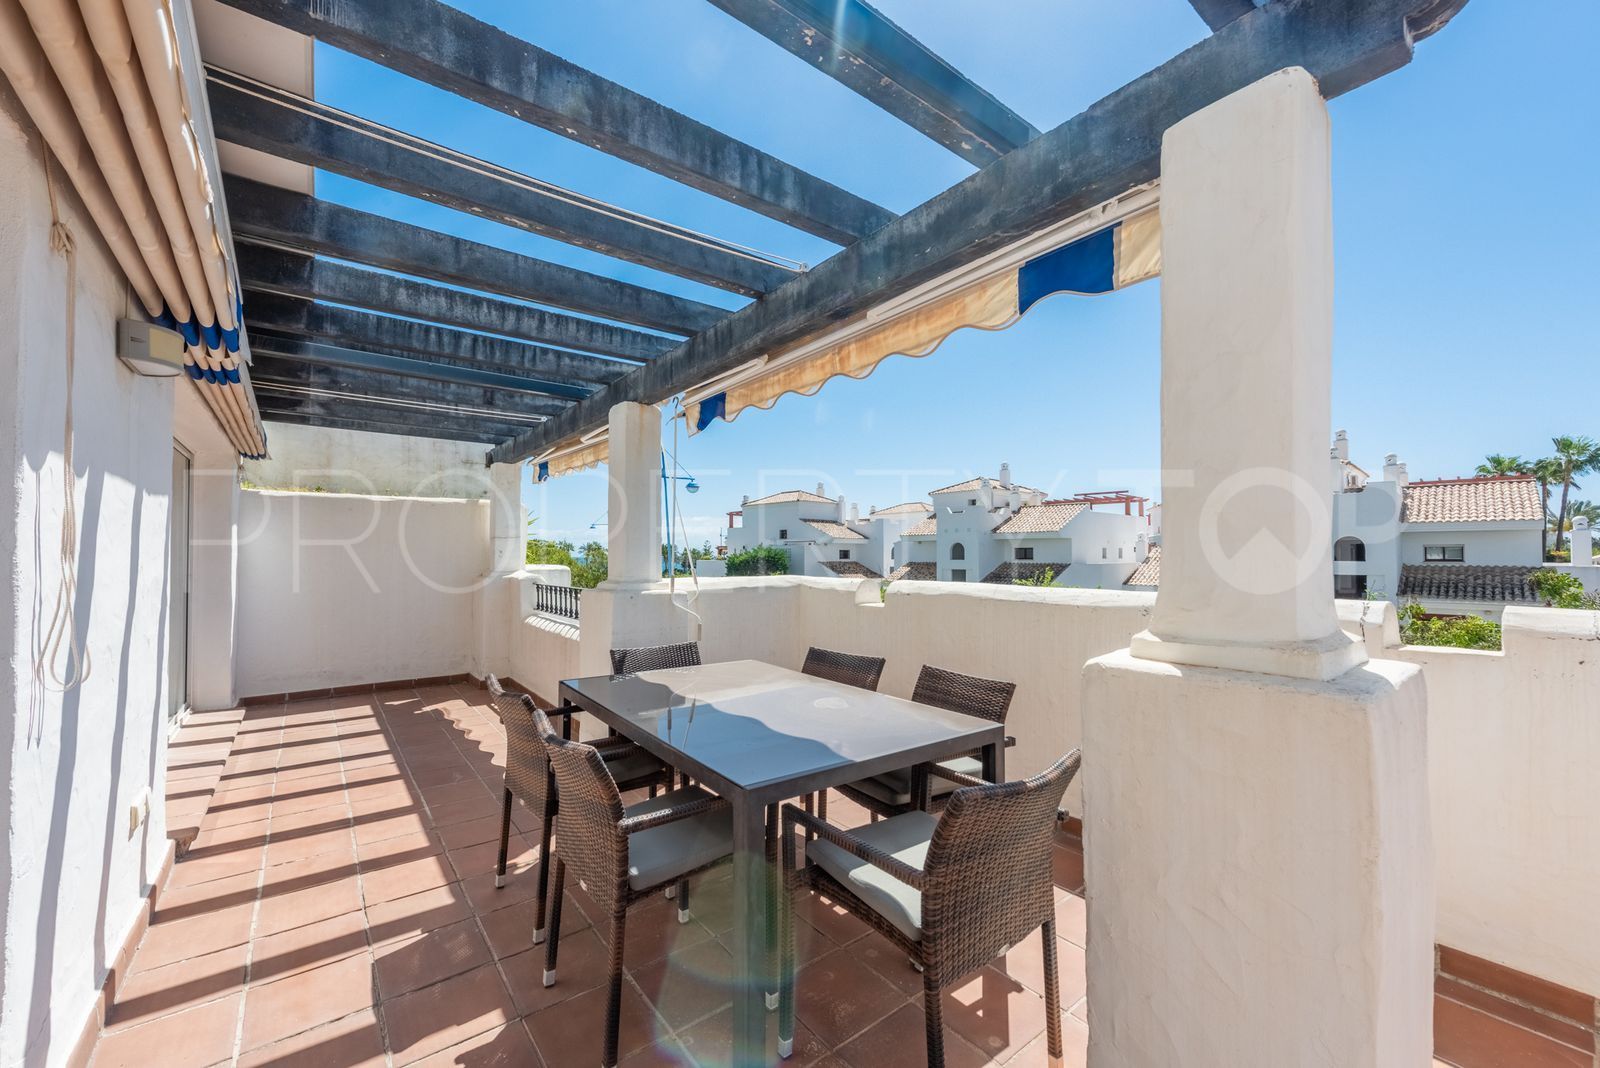 For sale 2 bedrooms duplex penthouse in San Pedro Playa